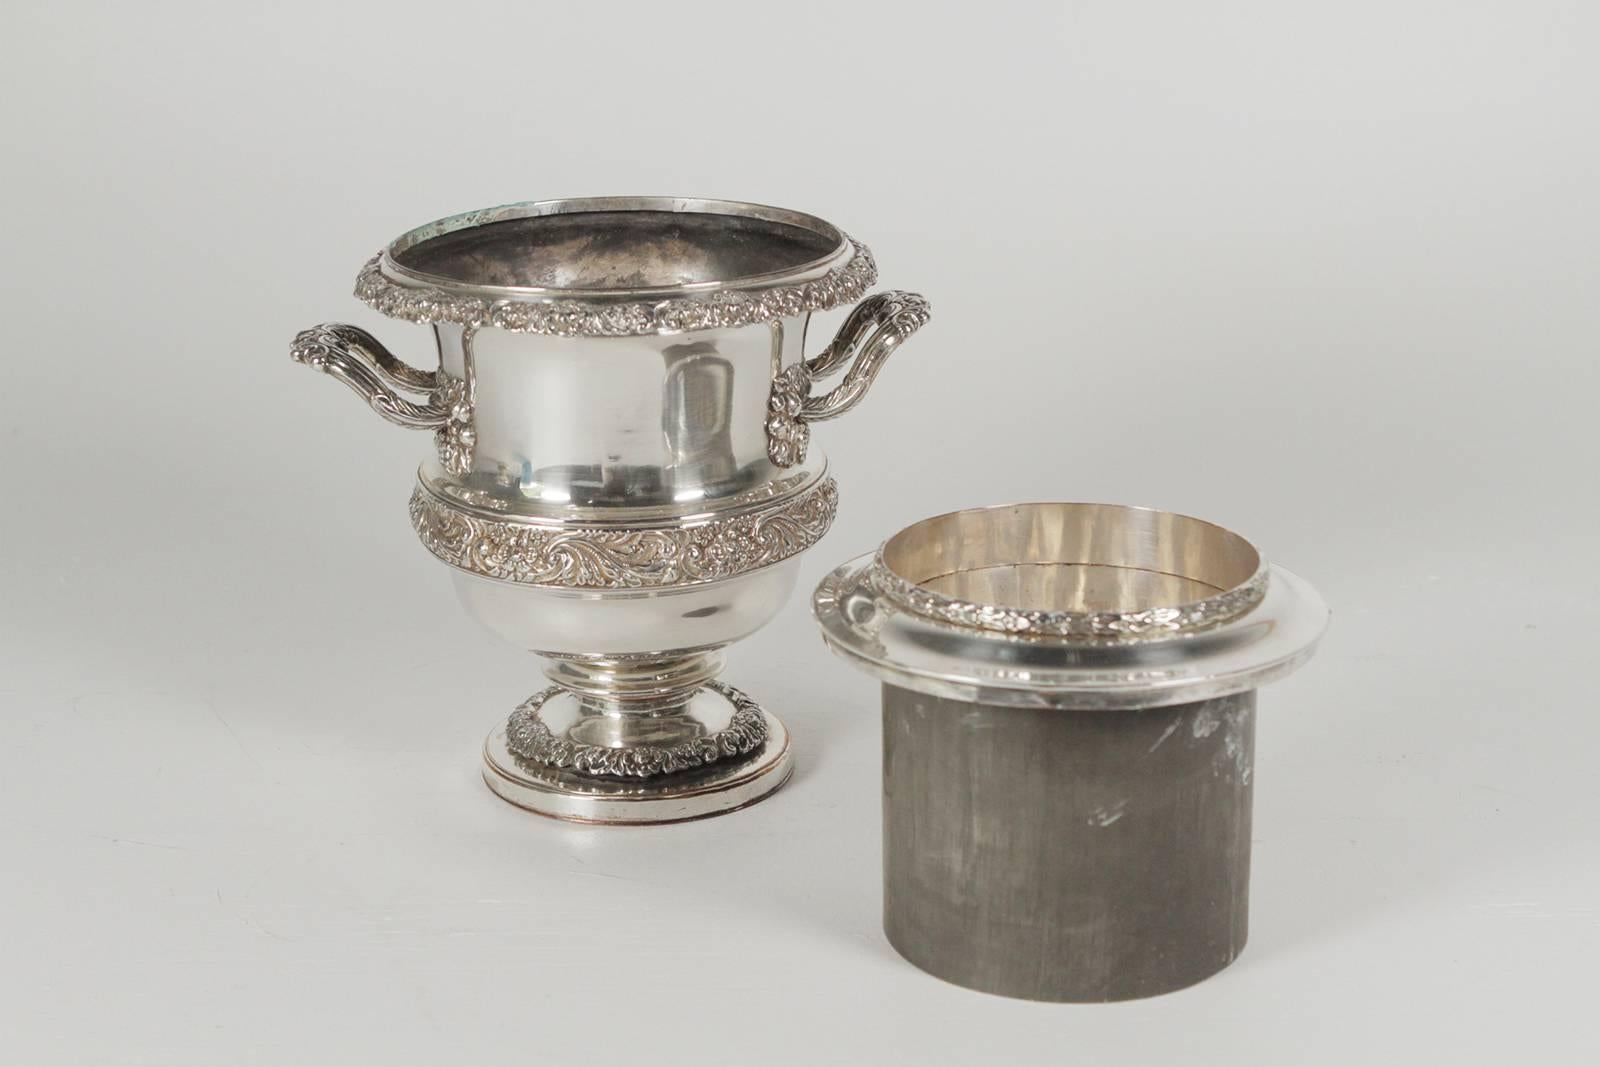 Regency Pair of Early Sheffield Plate Wine Coolers, England, circa 1820